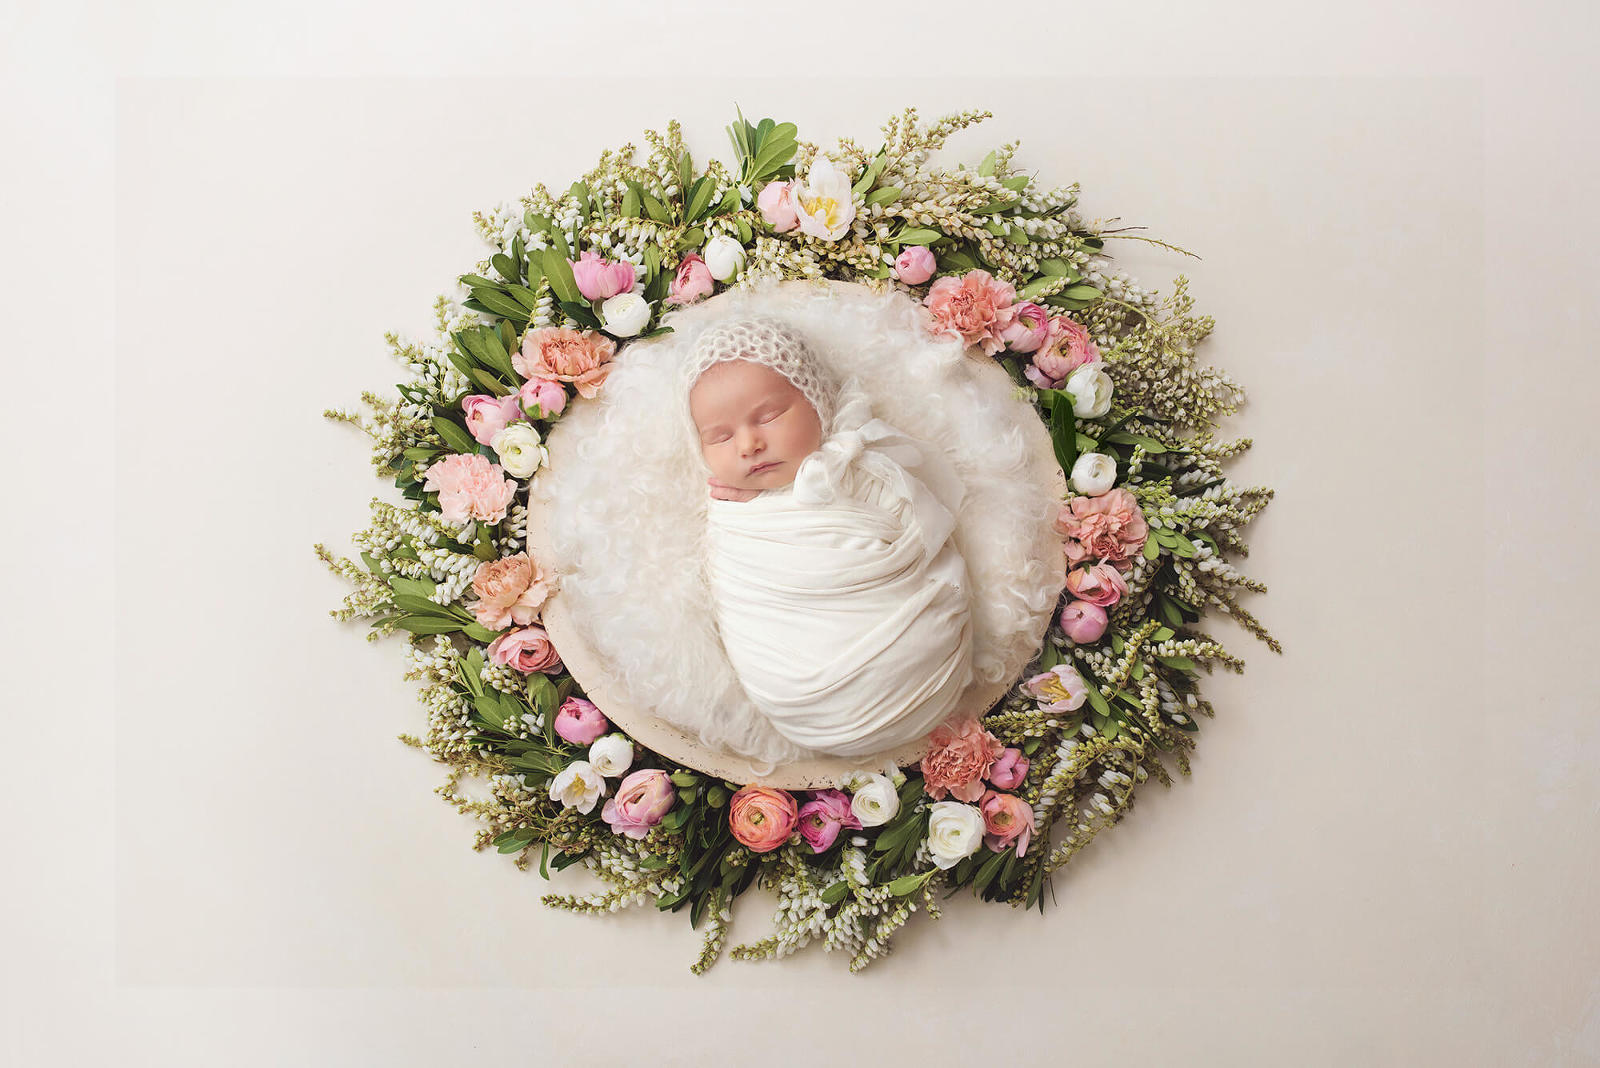 Baby girl during her newborn session laying in a plush nest surrounded by flowers and greenery during her session with Belle Vie Photography in Tucson